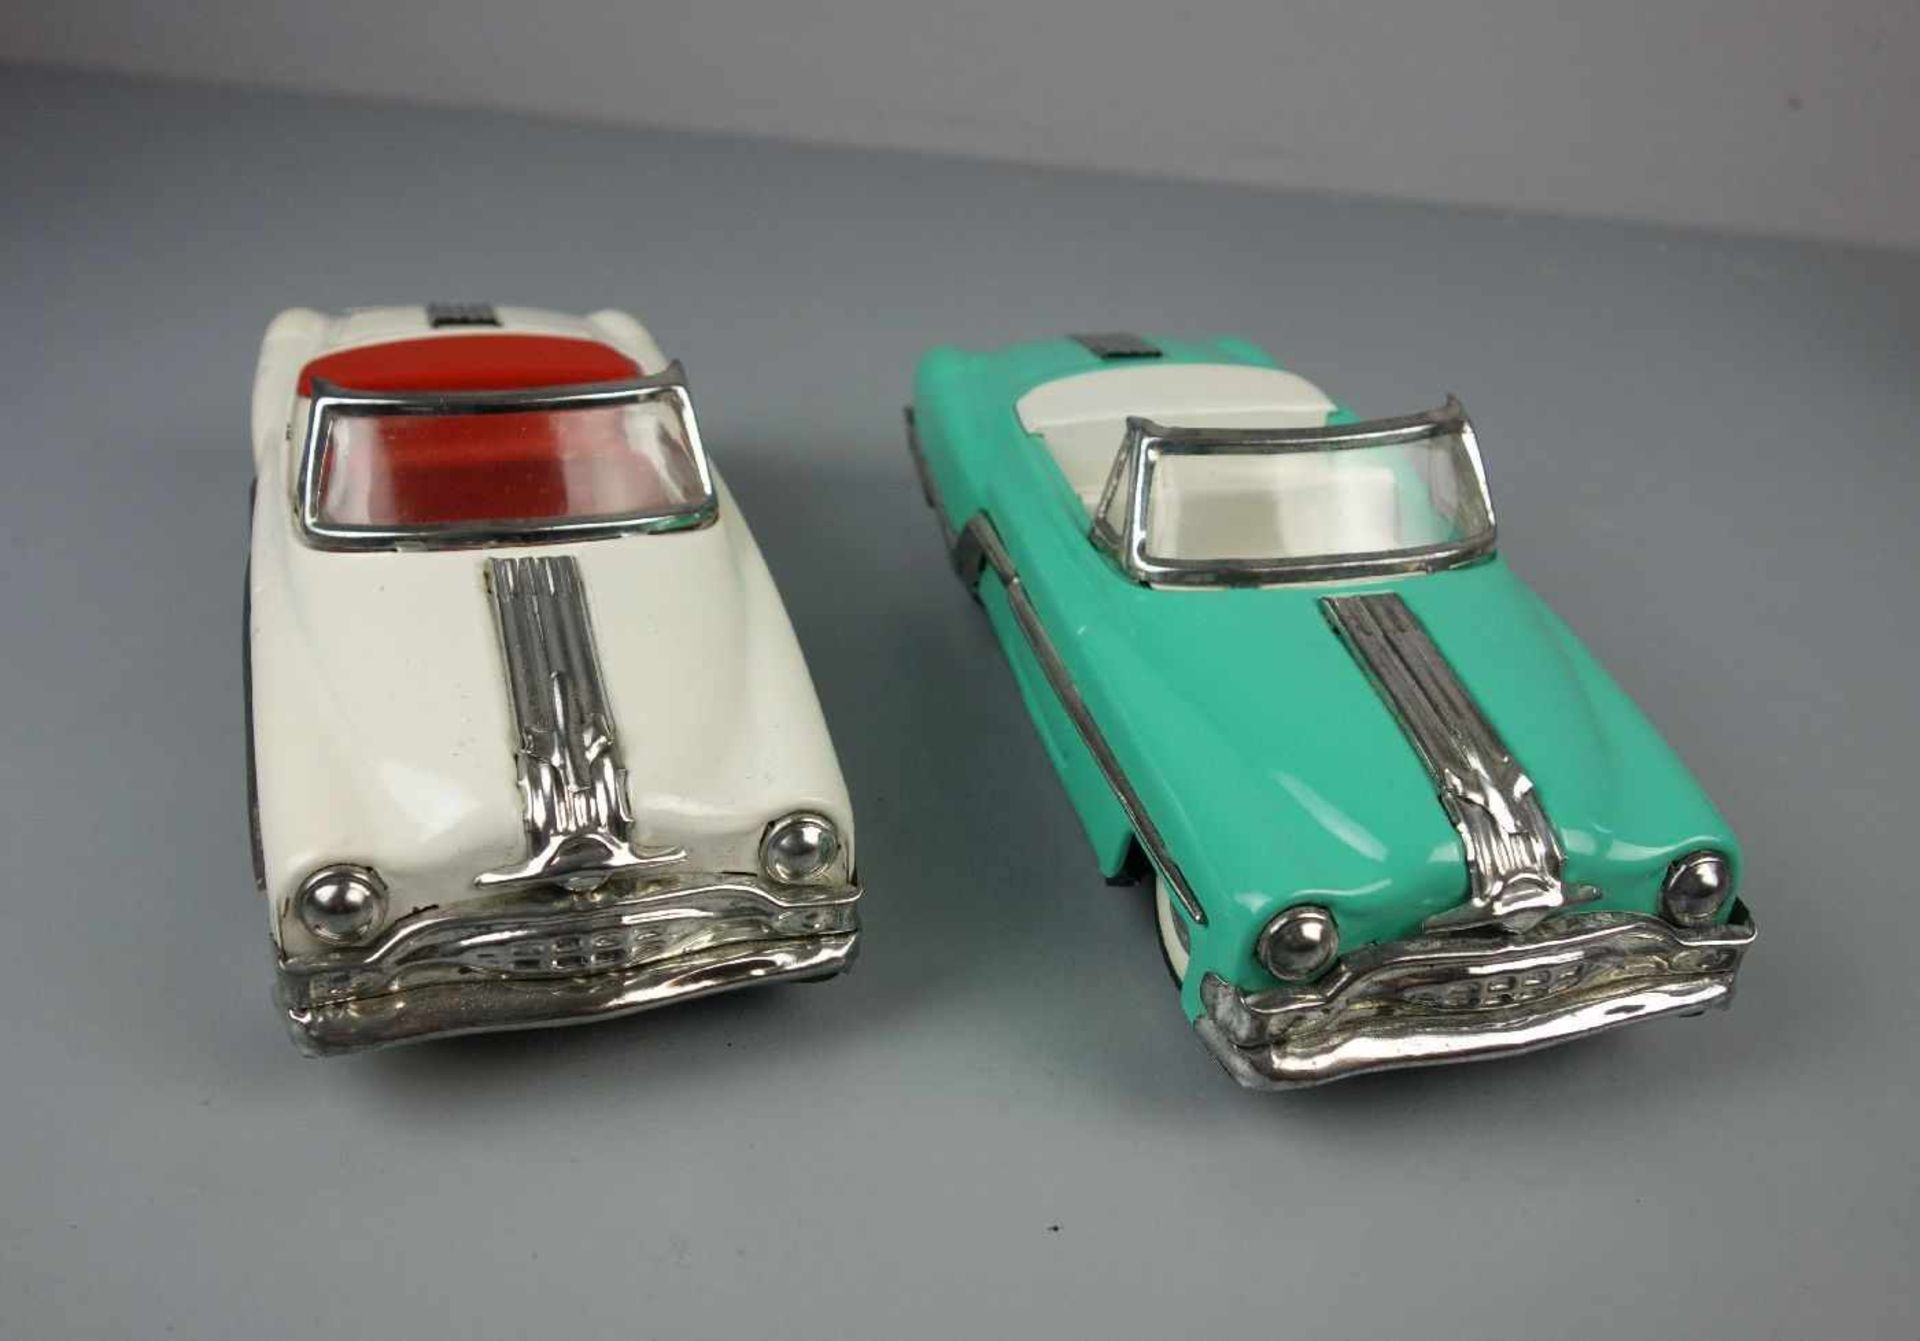 BLECHSPIELZEUG / FAHRZEUGE: 2 AUTOS - MINISTER - OPEN DELUXE / two tin toy cars, Mitte 20. Jh., - Image 3 of 7